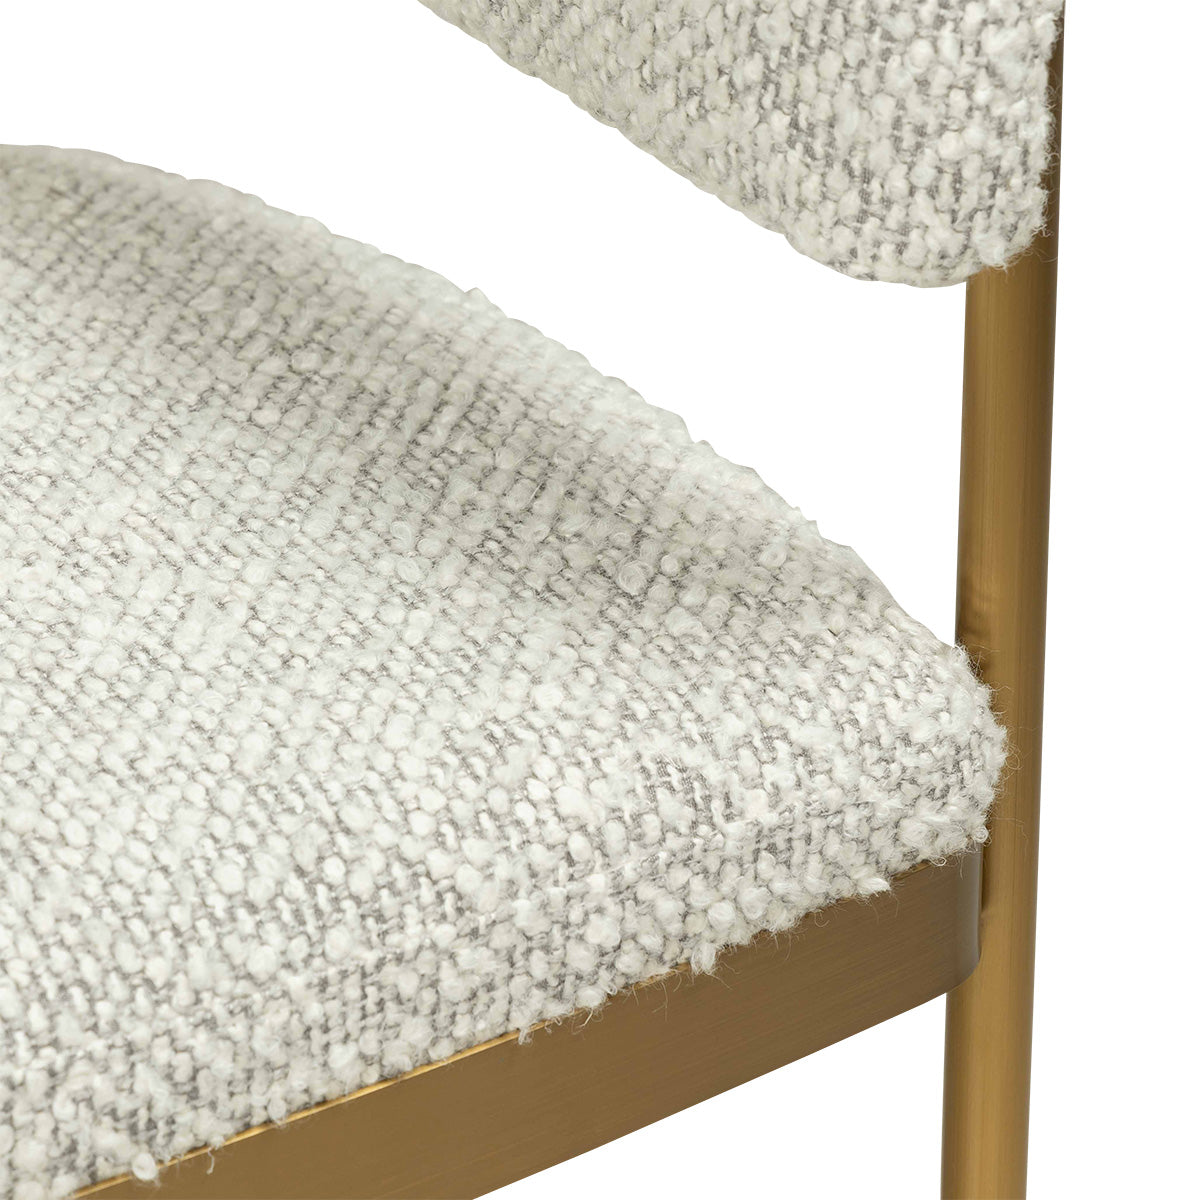 Maldives Dining Chair in Brushed Brass Frame